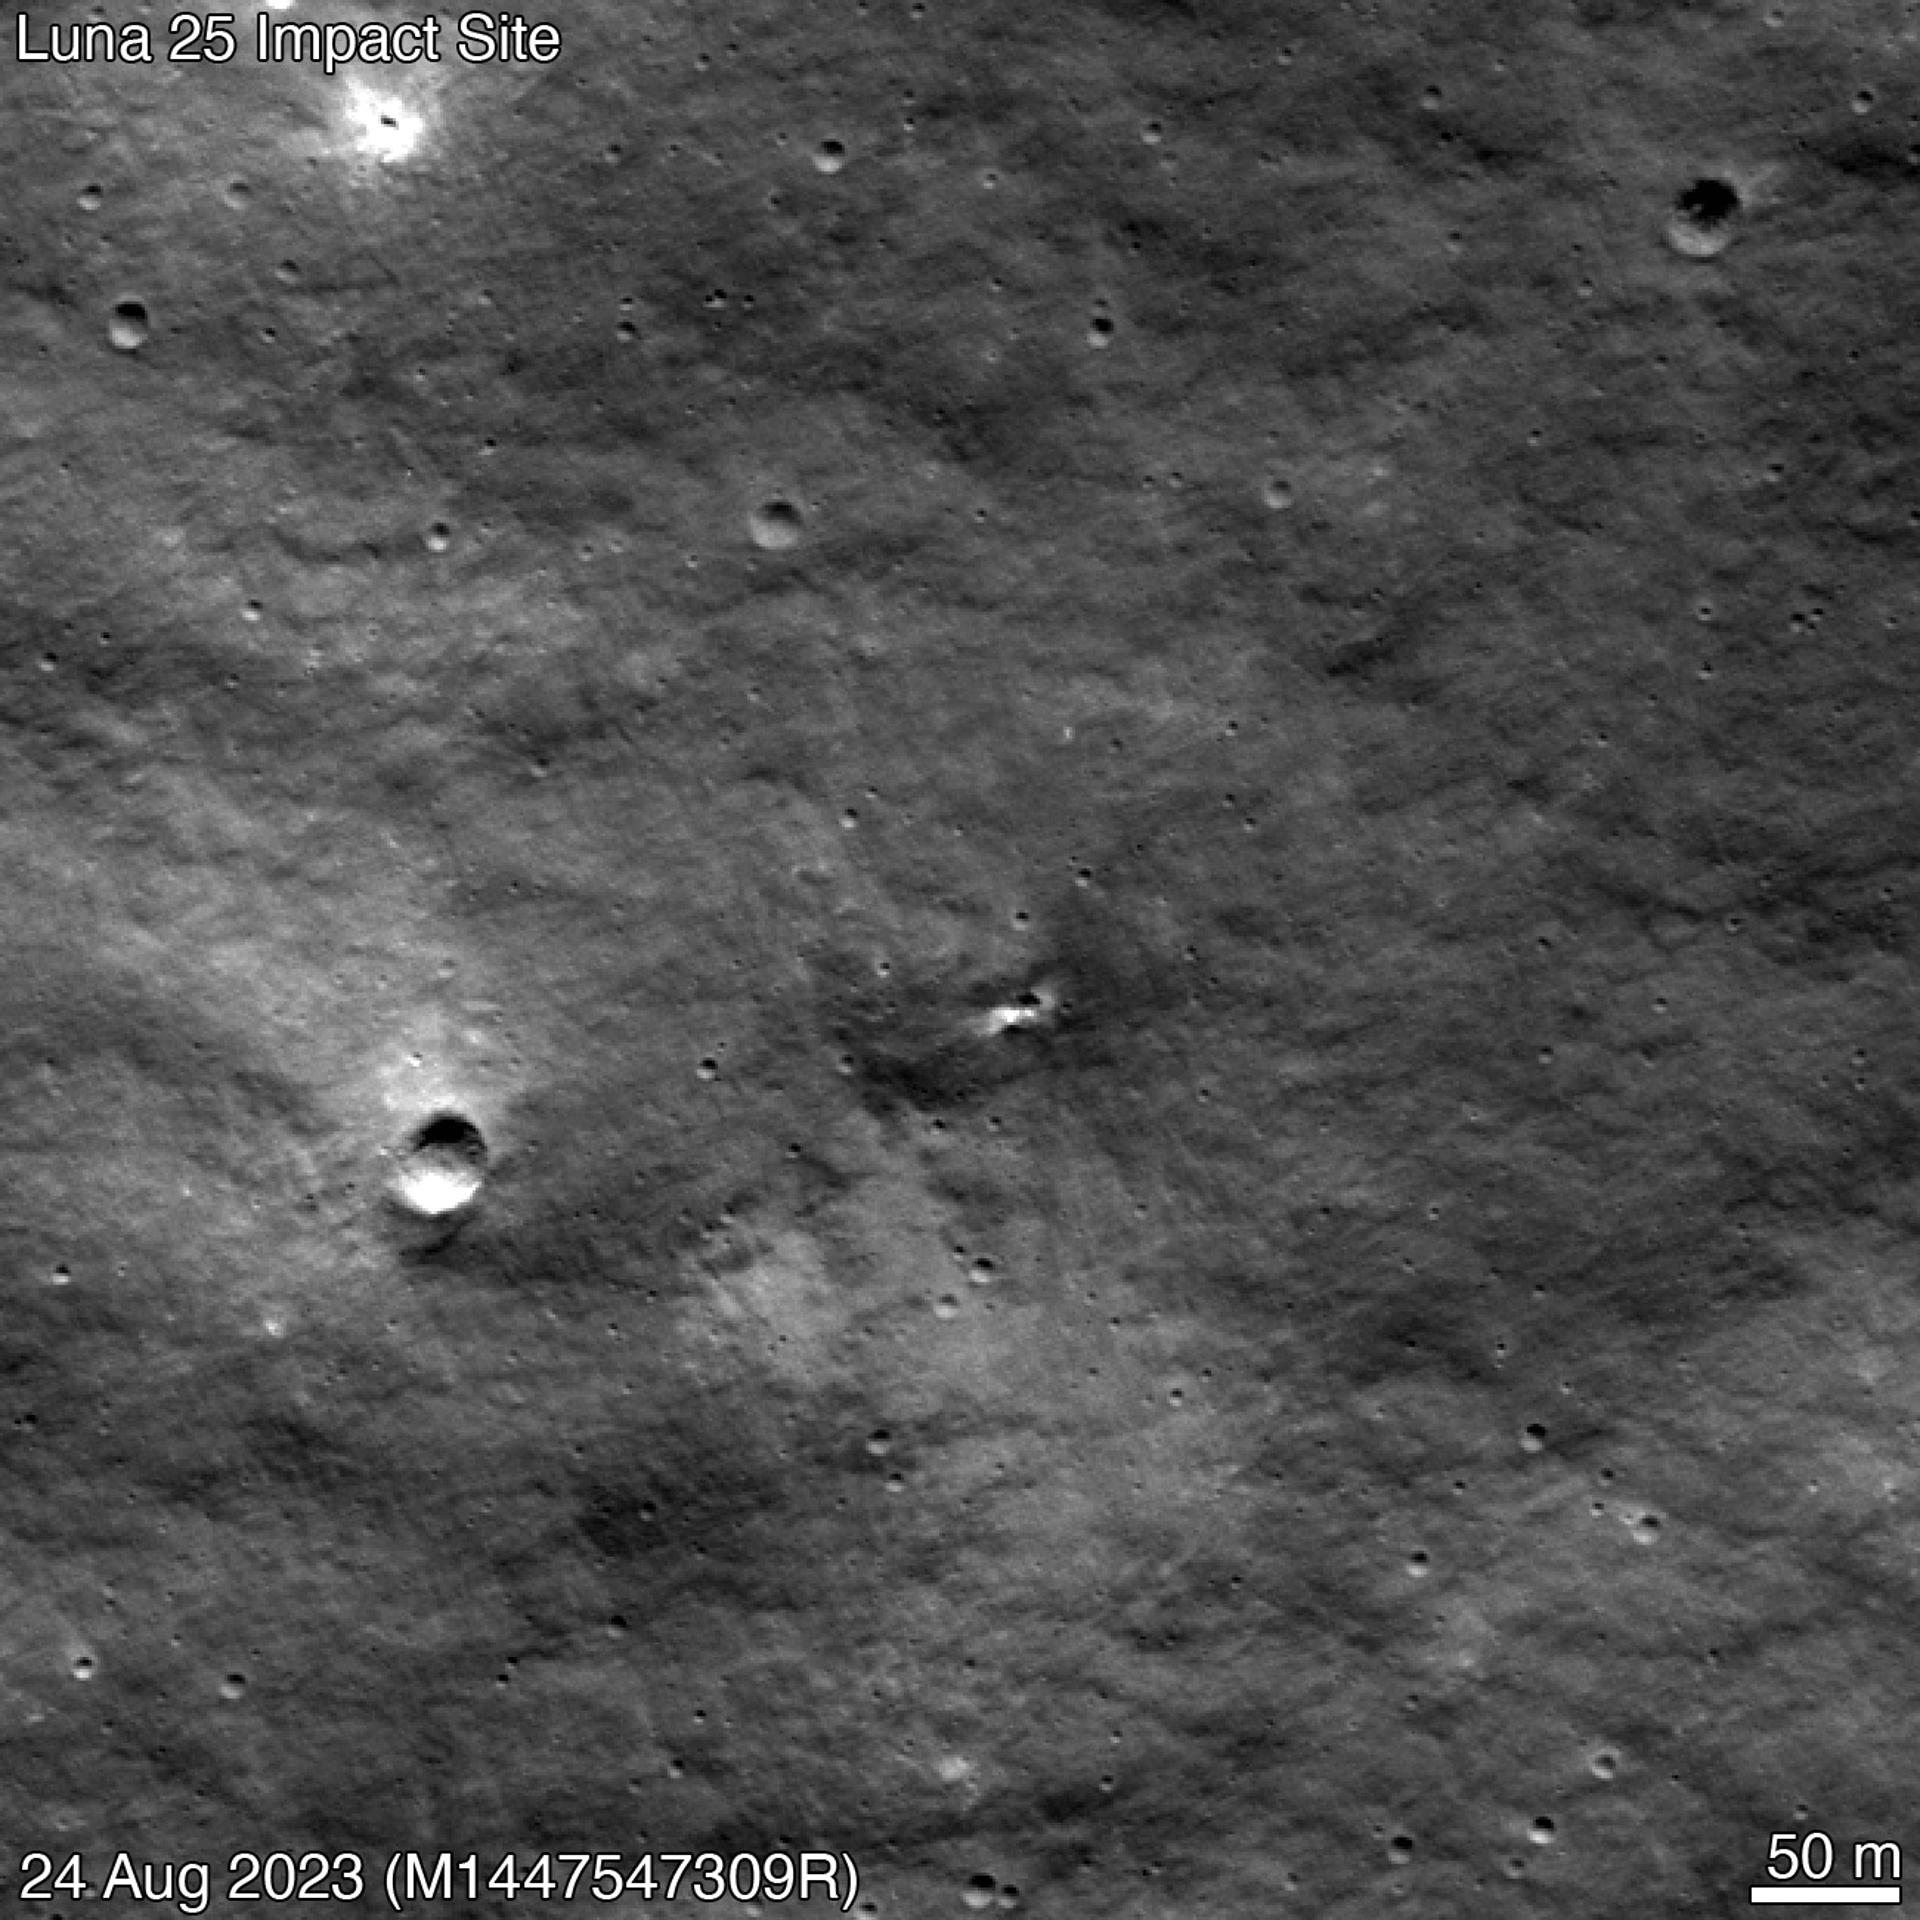 NASA achieves images of new crater on the moon after failed mission